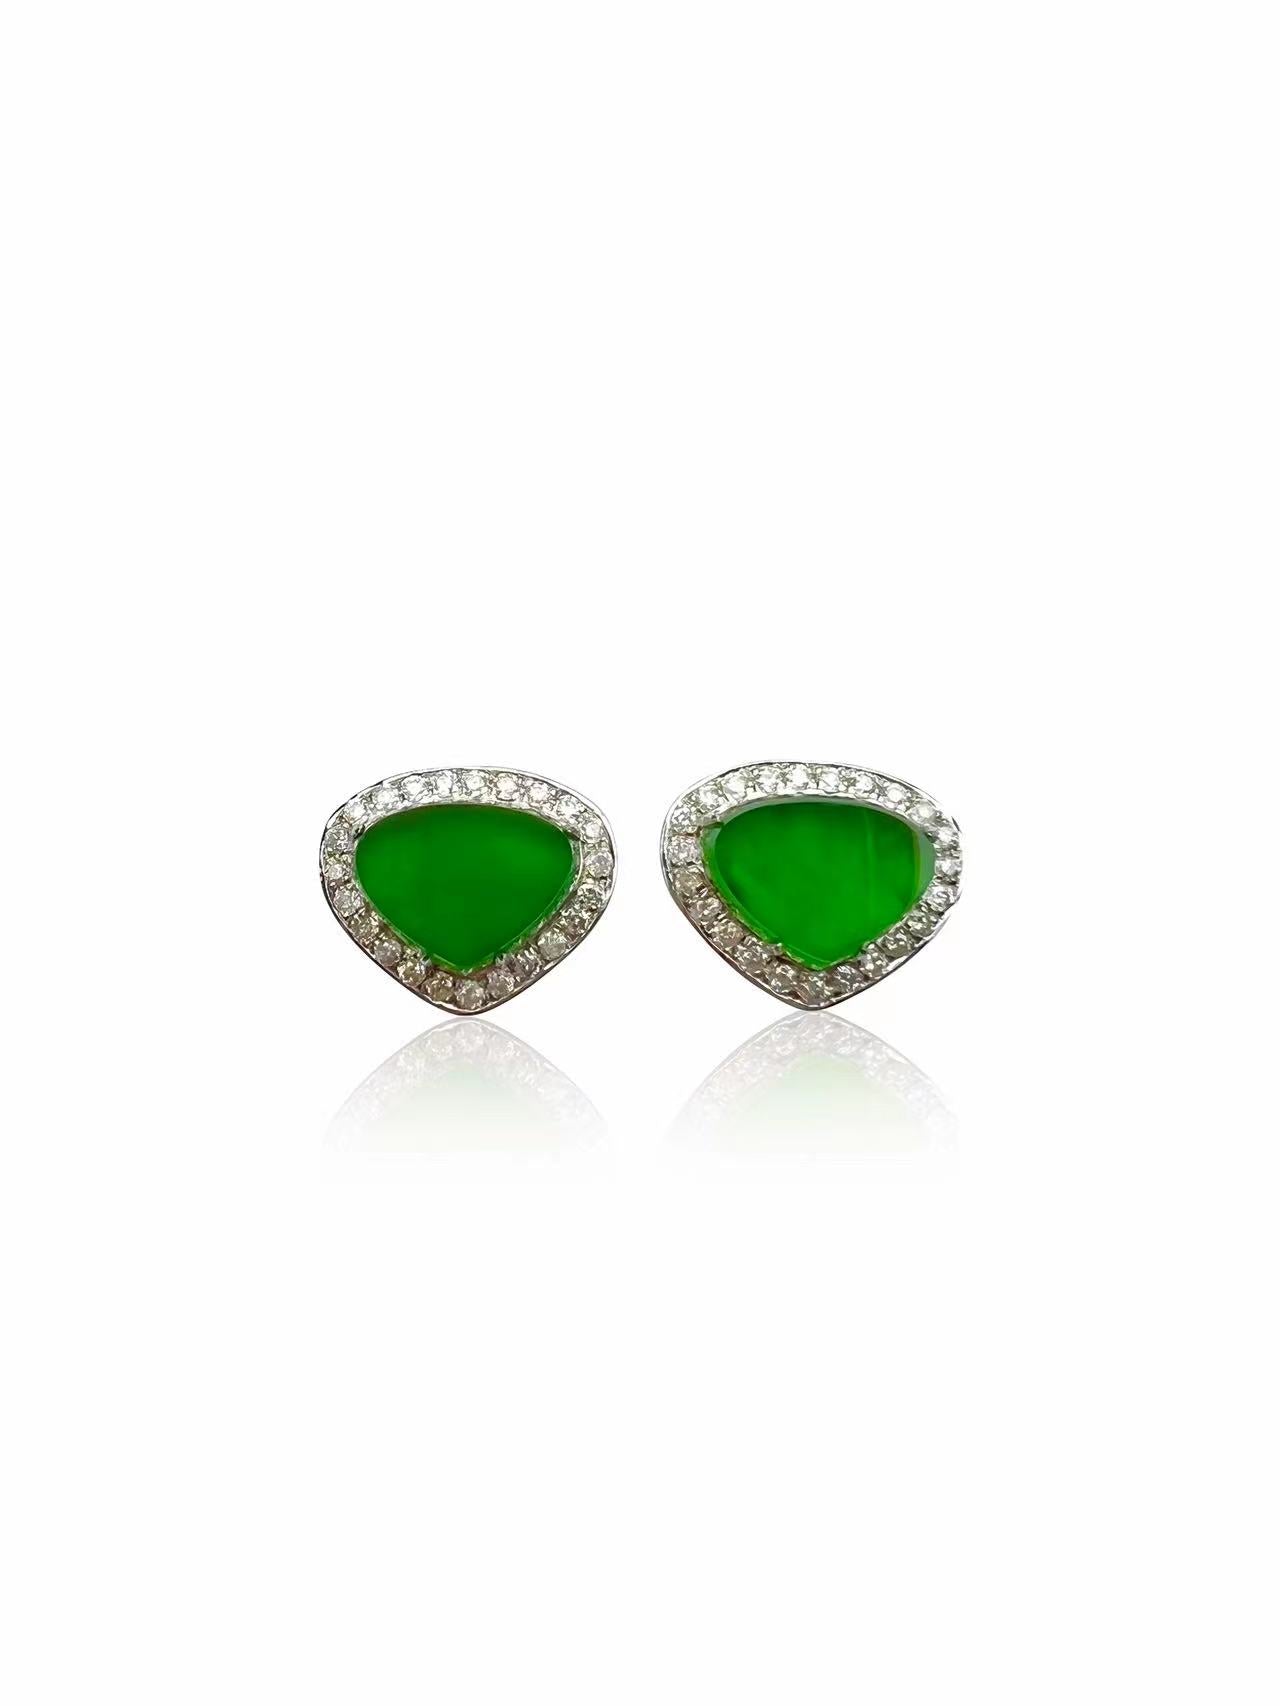 Jadeite Earrings in 18K white gold and with diamonds